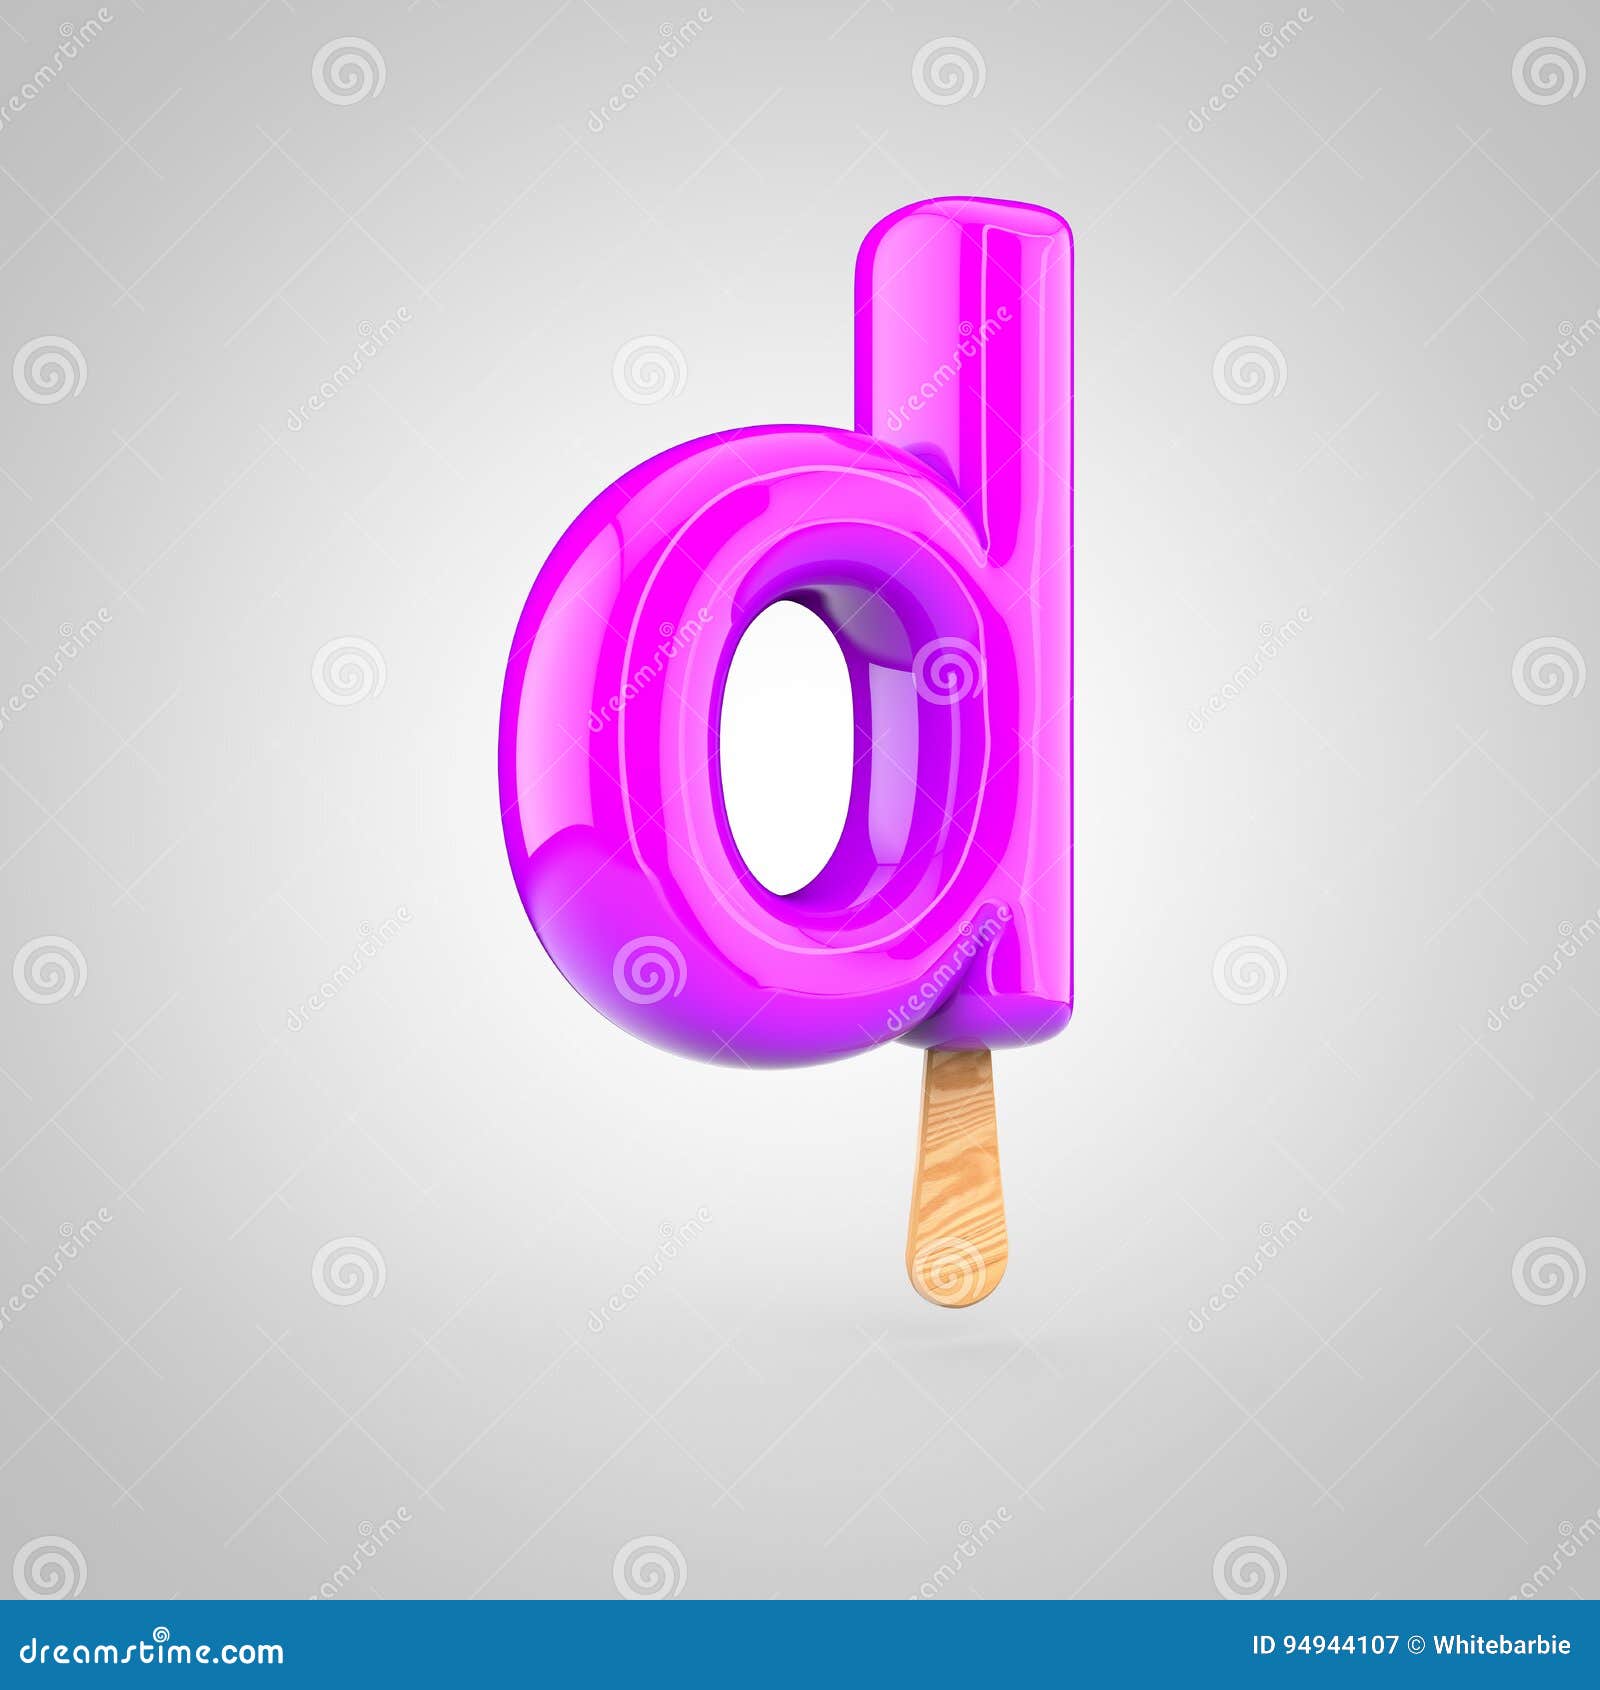 Ice Cream Letter D Lowercase Isolated on White Background Stock ...